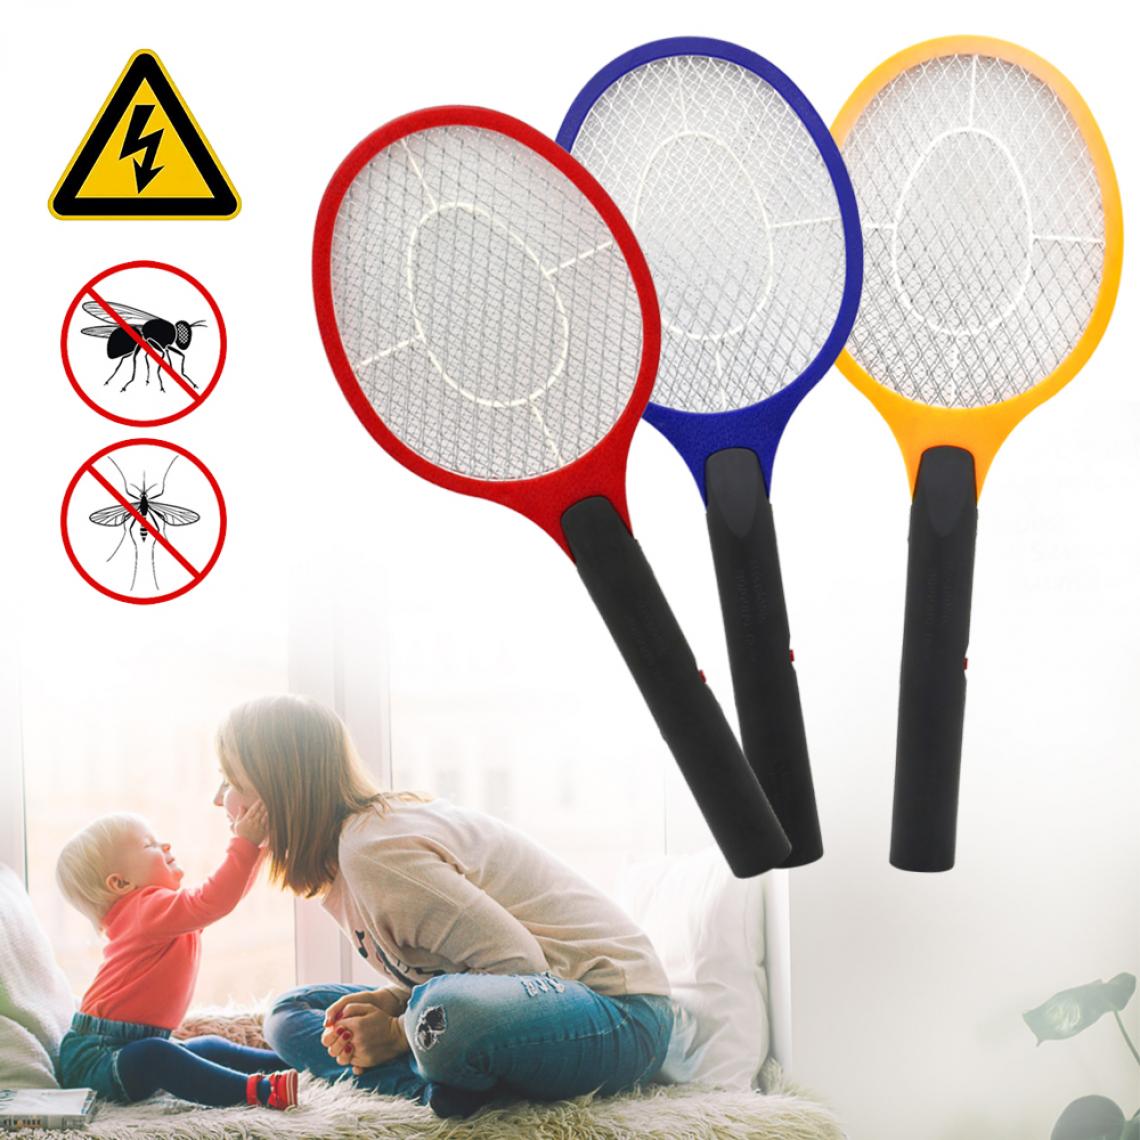 Einfeben - 3X Electric Fly Swatter Insect Killer, Mosquito Zapper Double Layered Mesh protection, Fly Repellent Free of Toxins - Aménagement de la cage